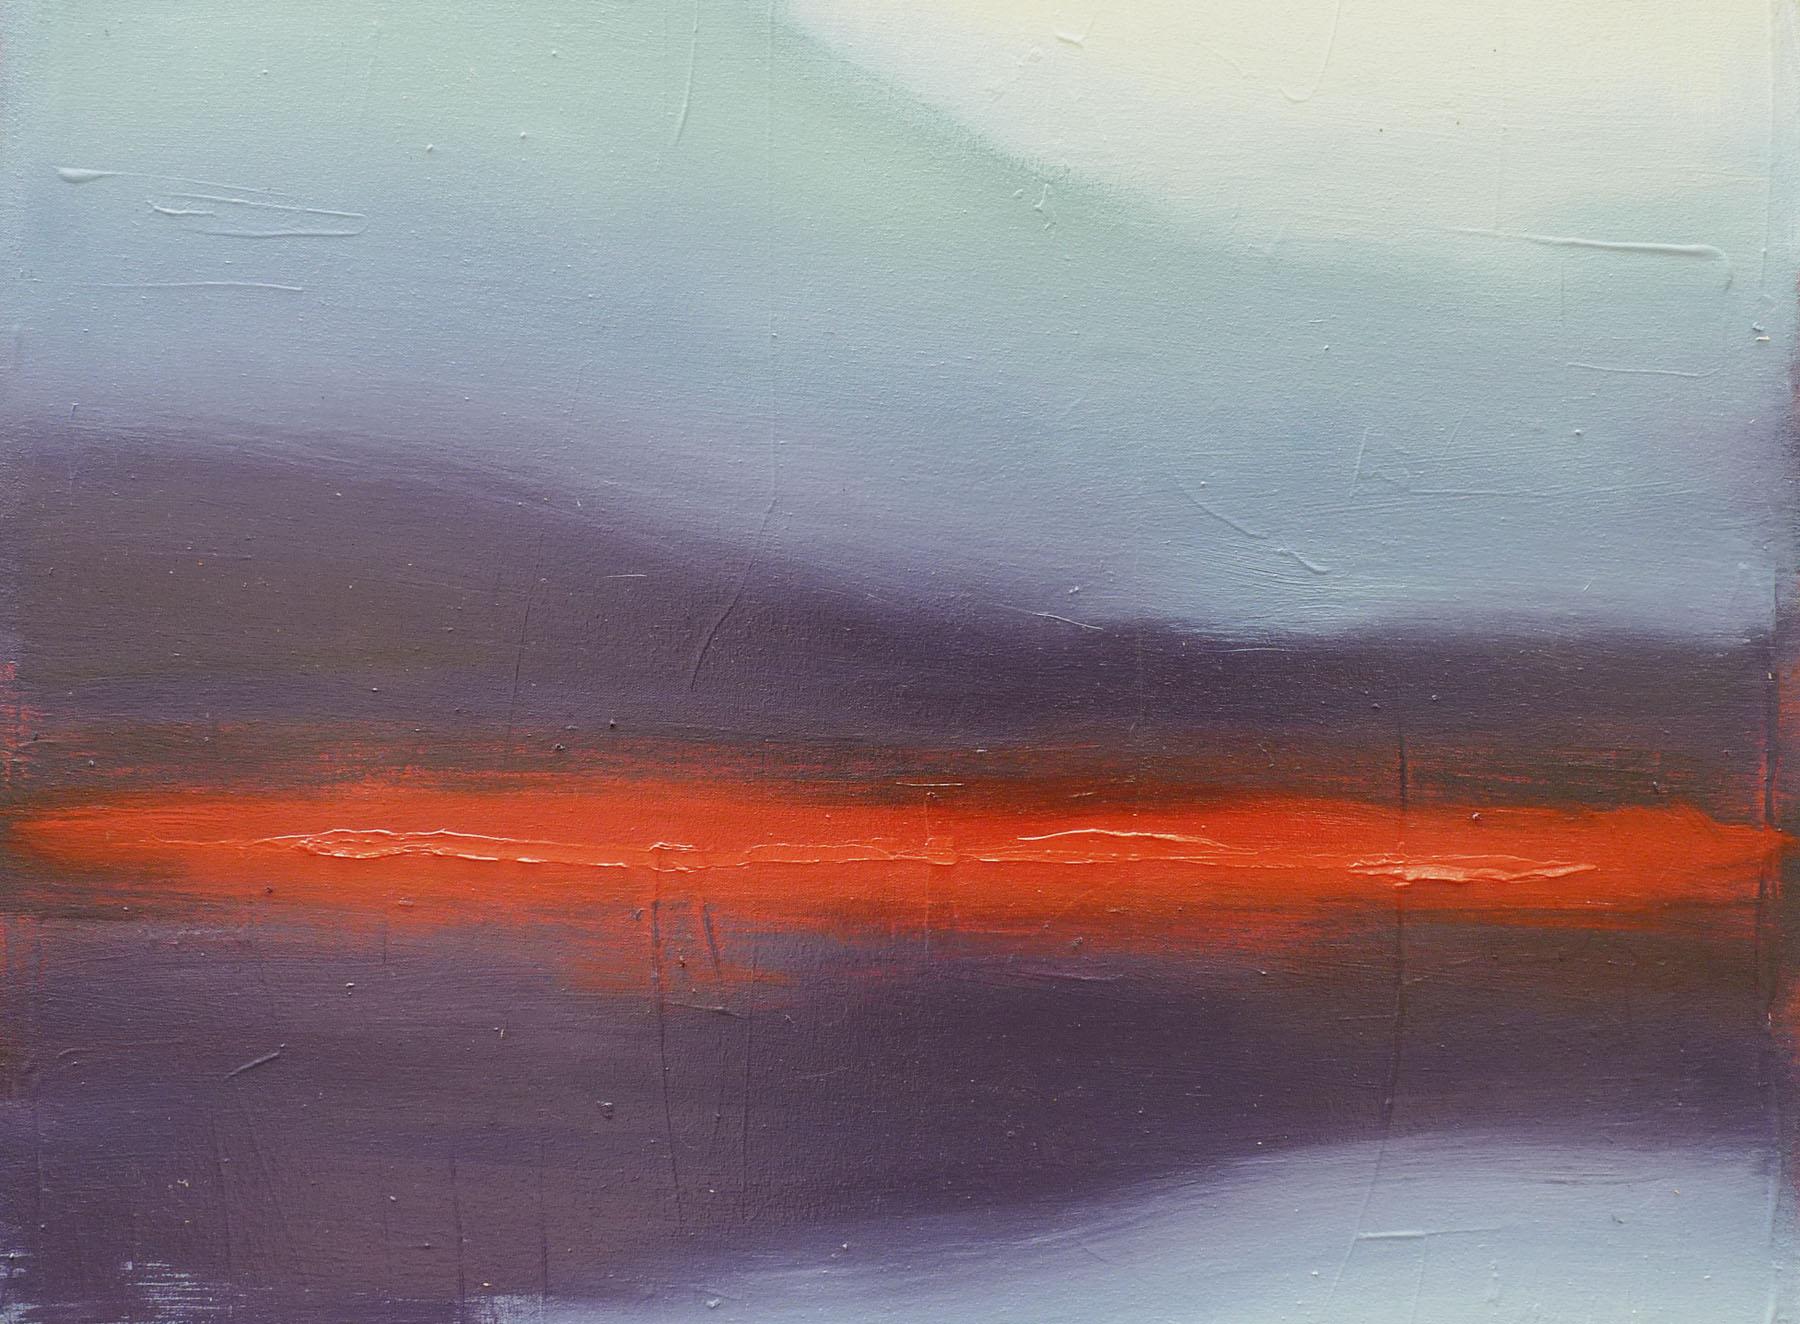 <p>Artist Comments<br>Artist Heidi Hybl paints an abstract seascape with soft and blurred edges, evoking a sense of tranquility and fluidity. The piece features a striking red horizon, subtly hinting at a cloudy sky and the vast expanse of the